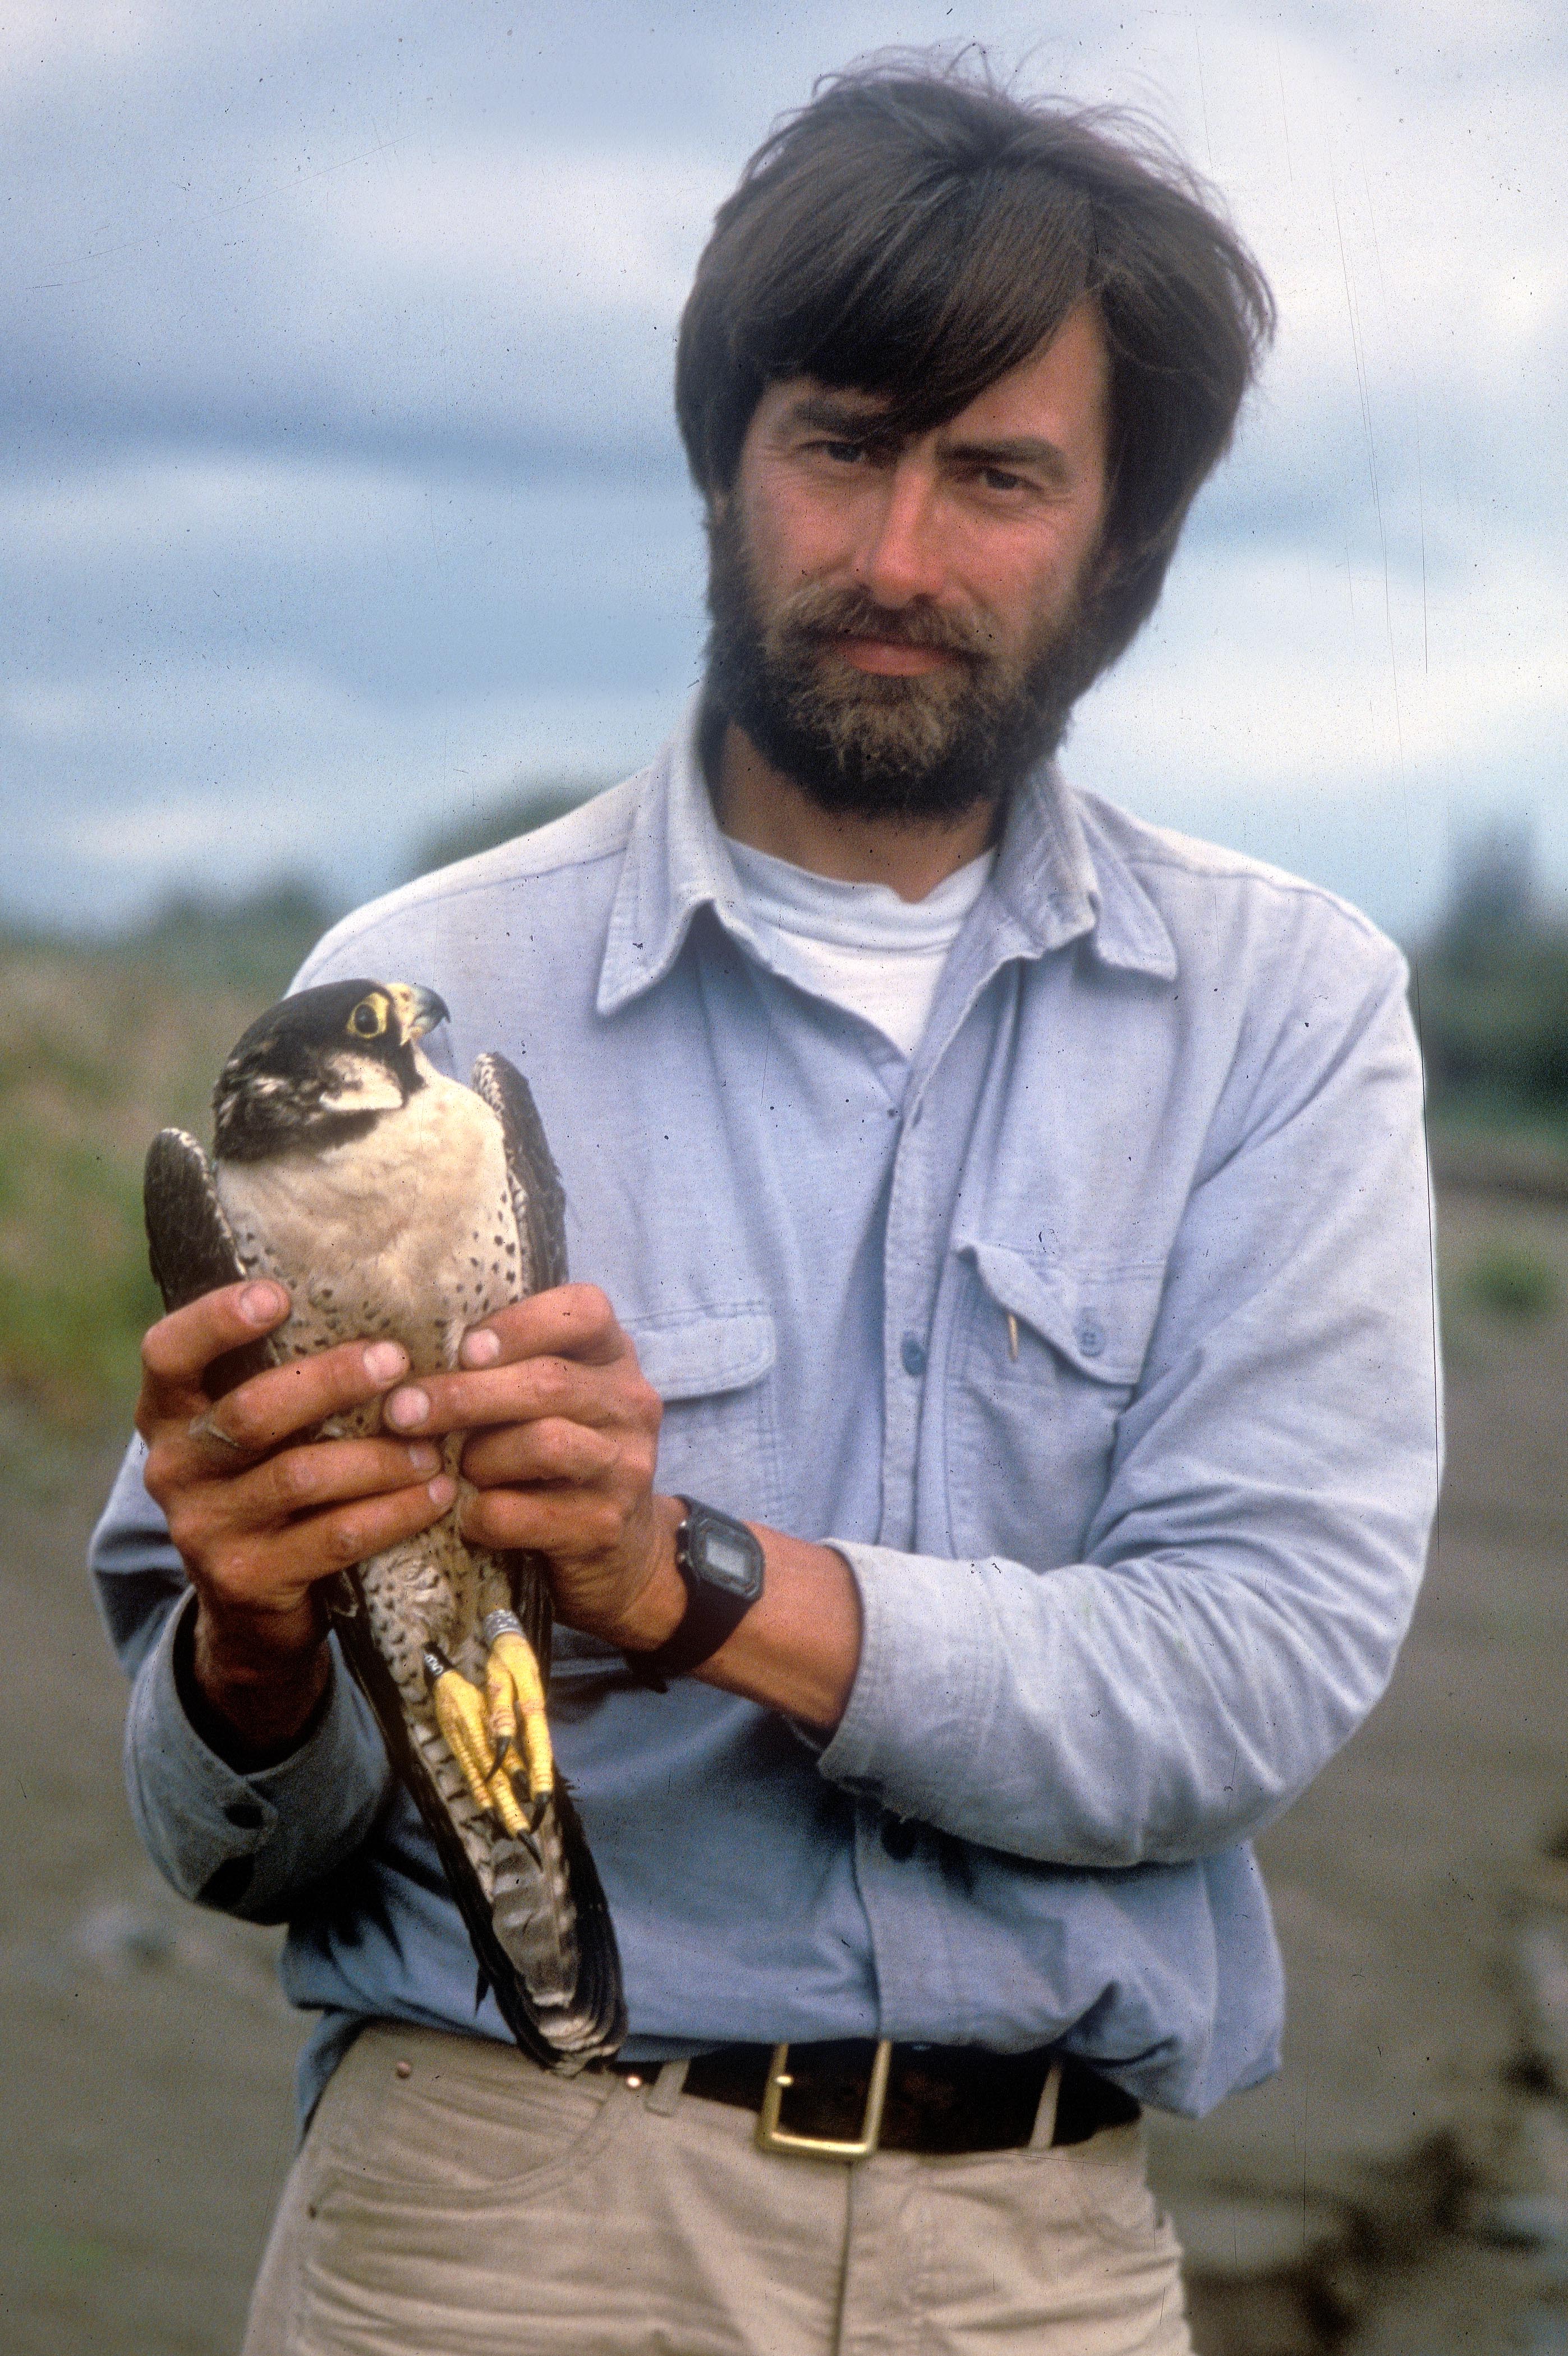 A bearded man looks into the camera holding a peregrine falcon with both hands. The bird gazes back at him.